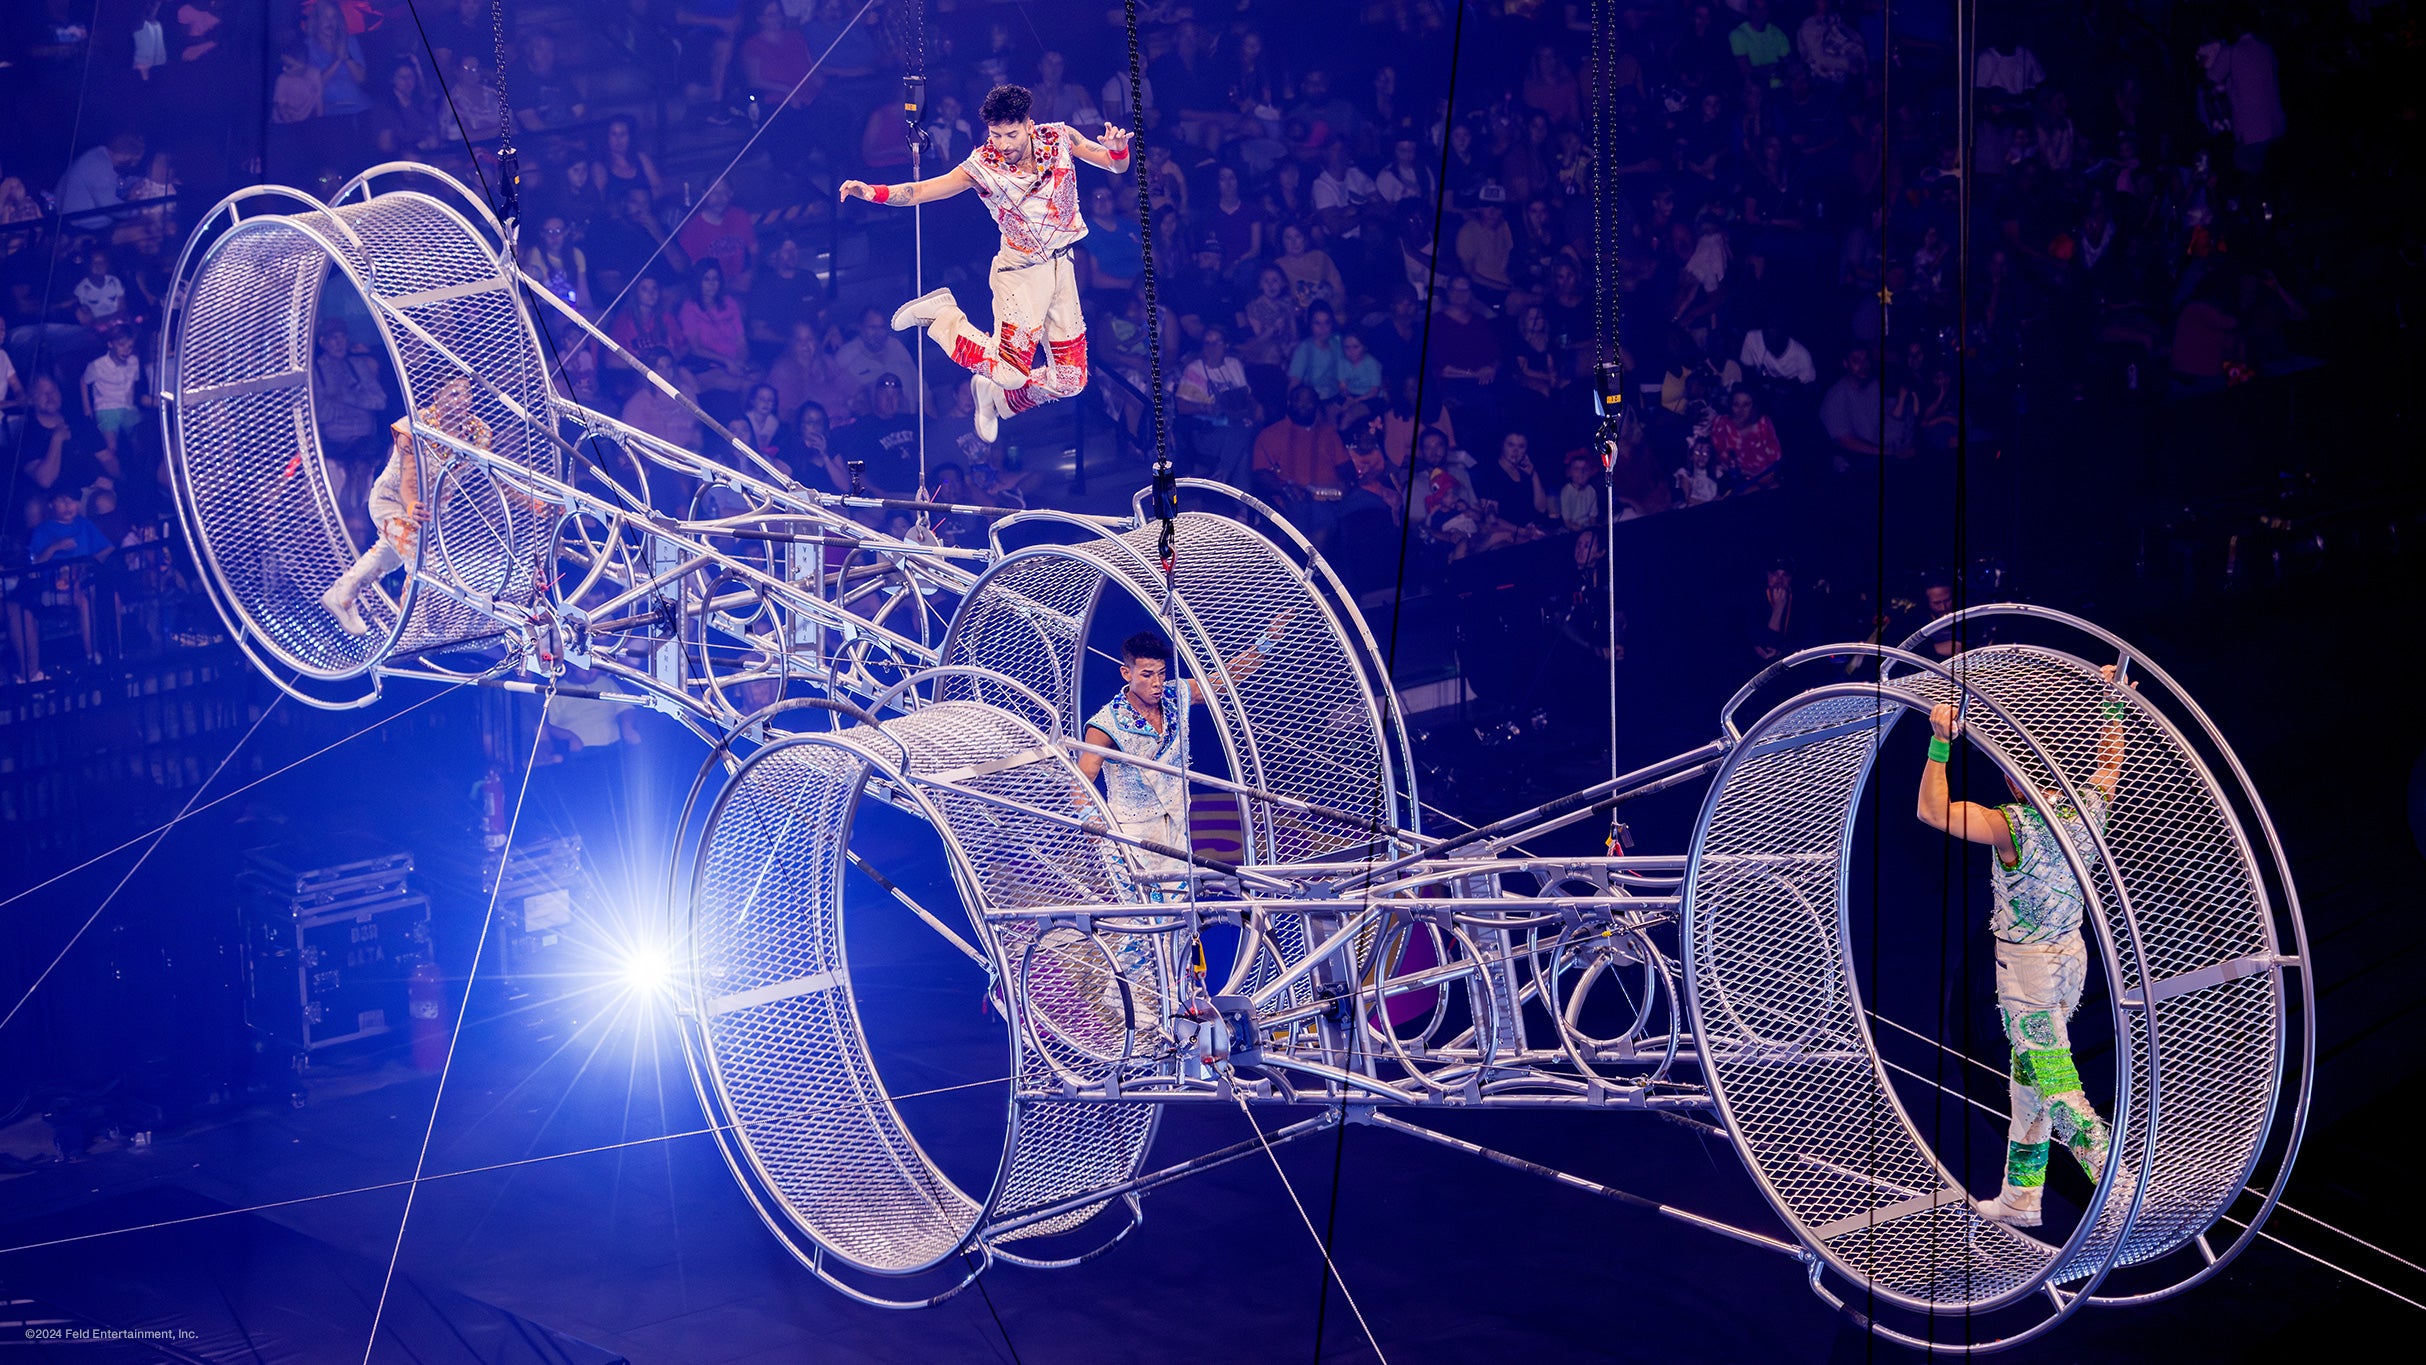 Ringling Bros. and Barnum & Bailey presents The Greatest Show On Earth presales in Columbus